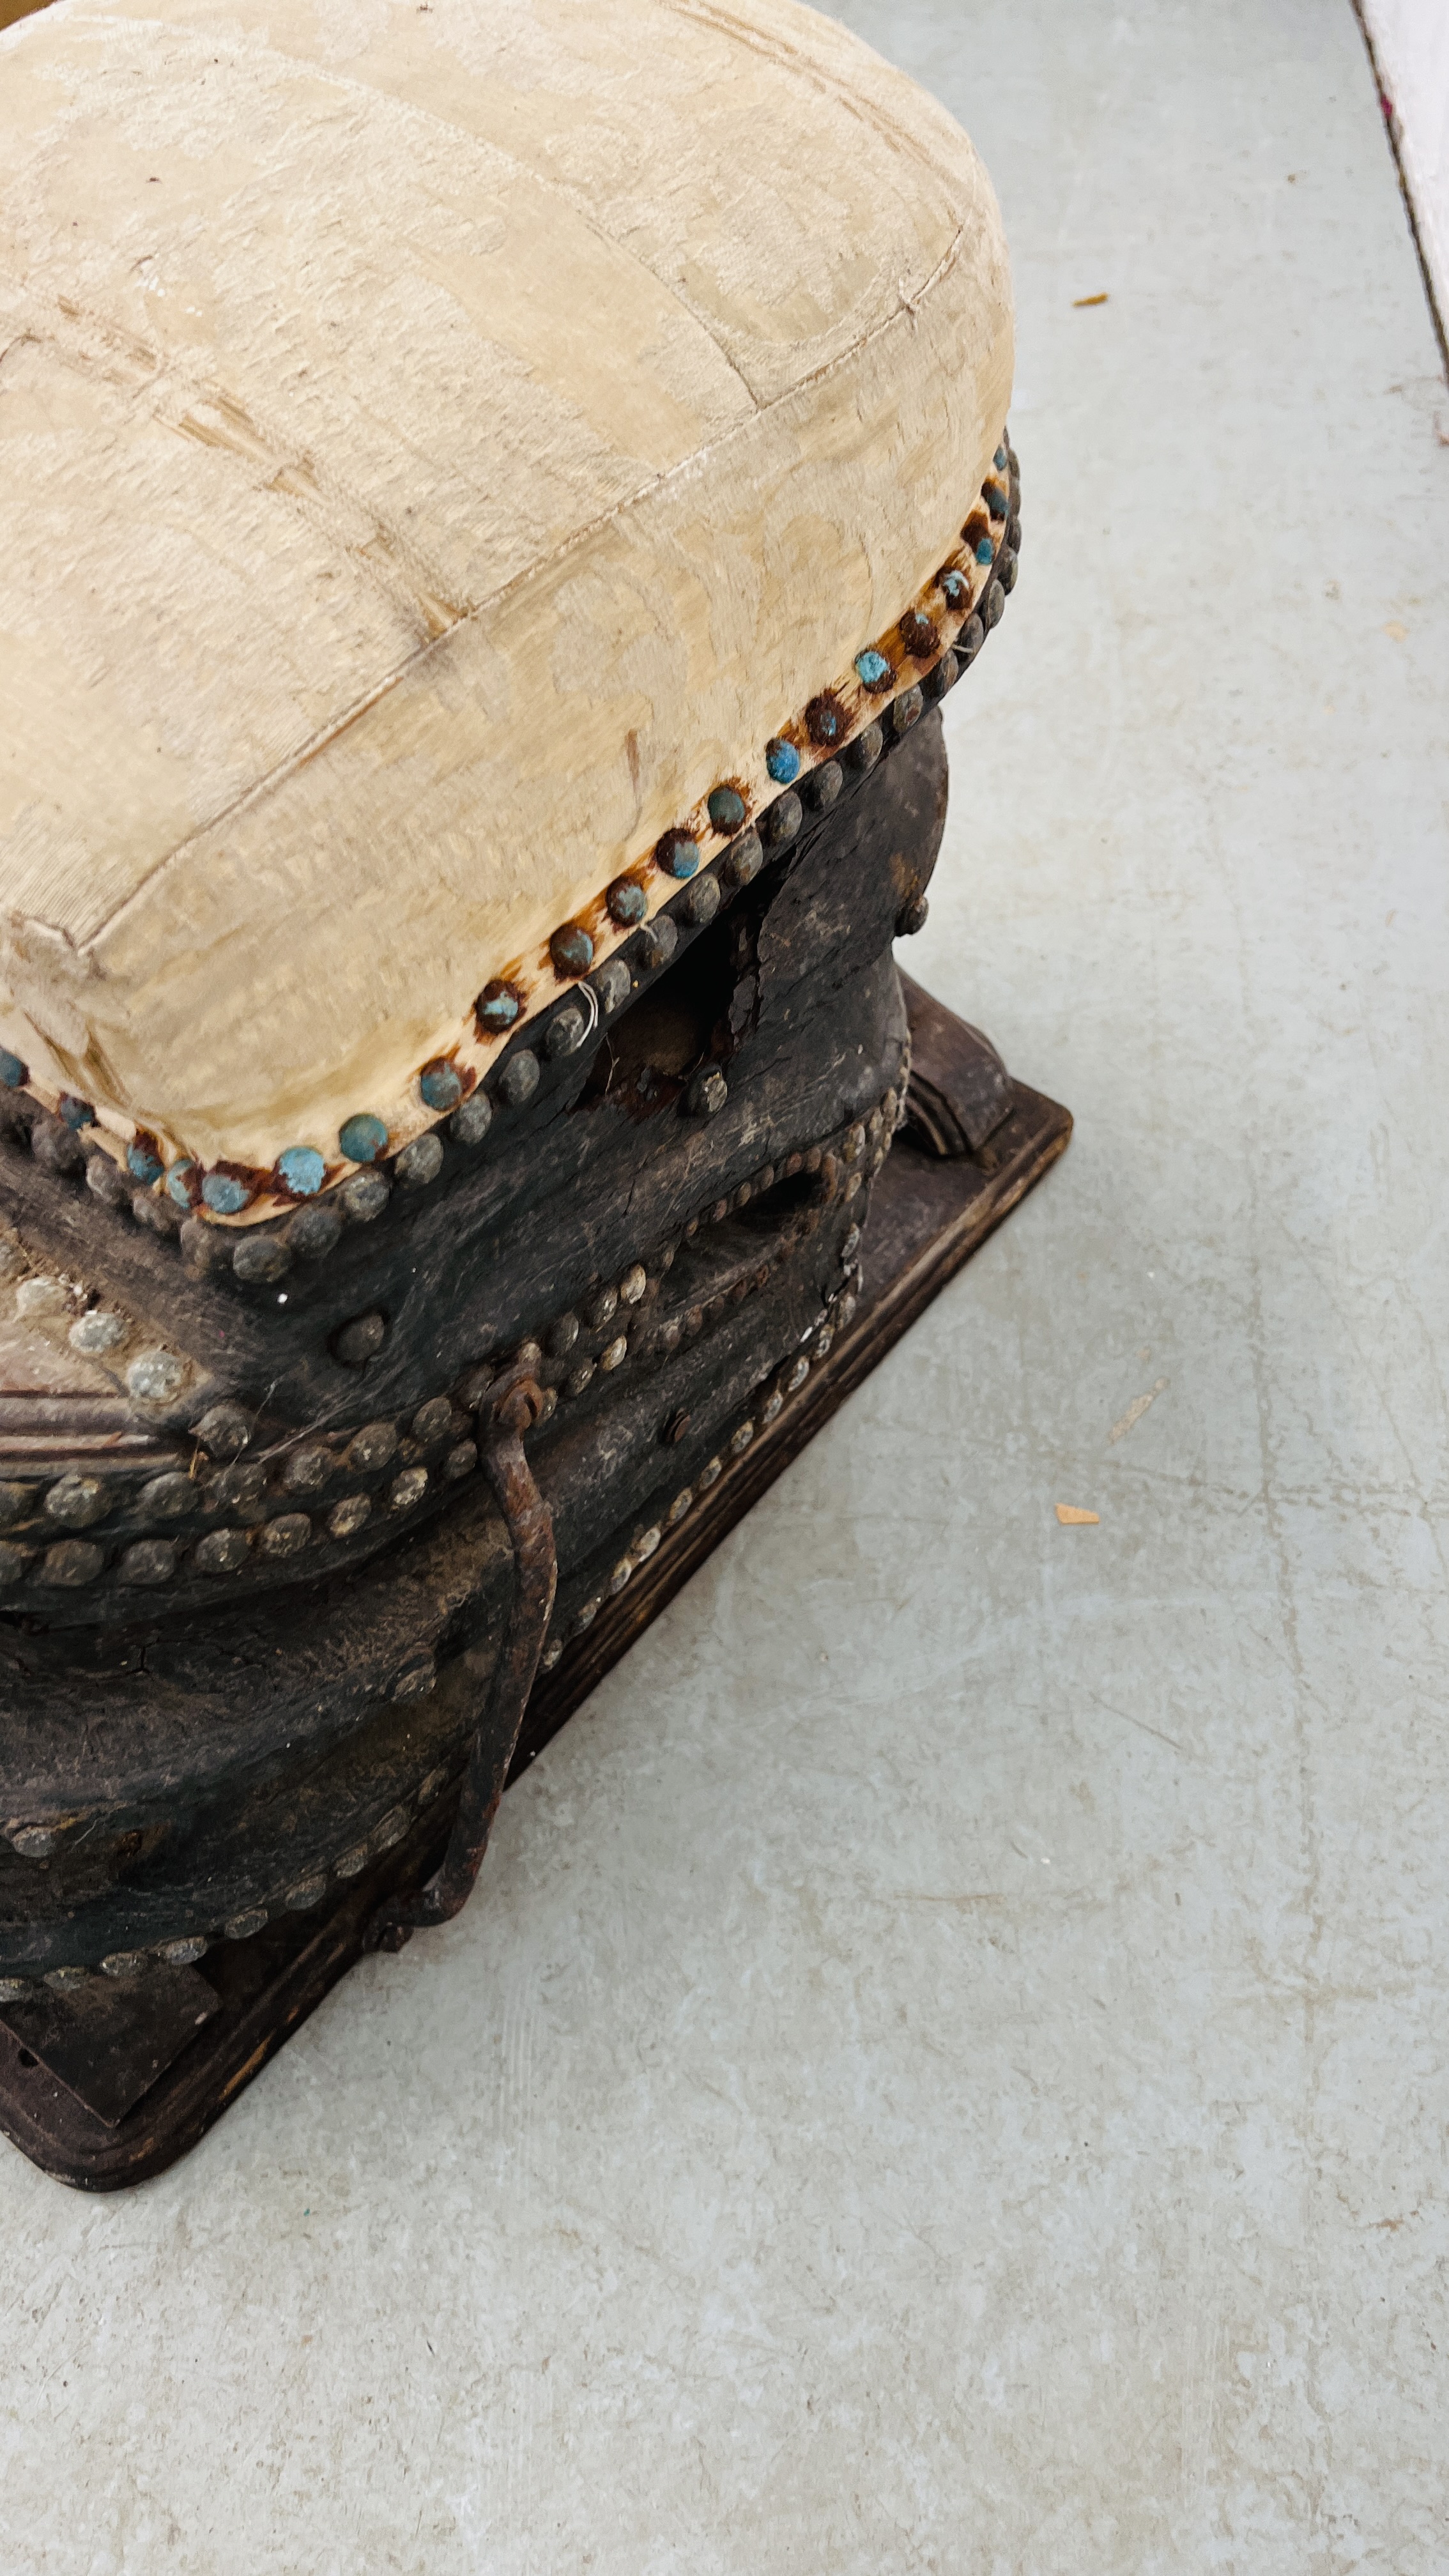 ANTIQUE BELLOWS / STOOL CONVERSION. - Image 7 of 7